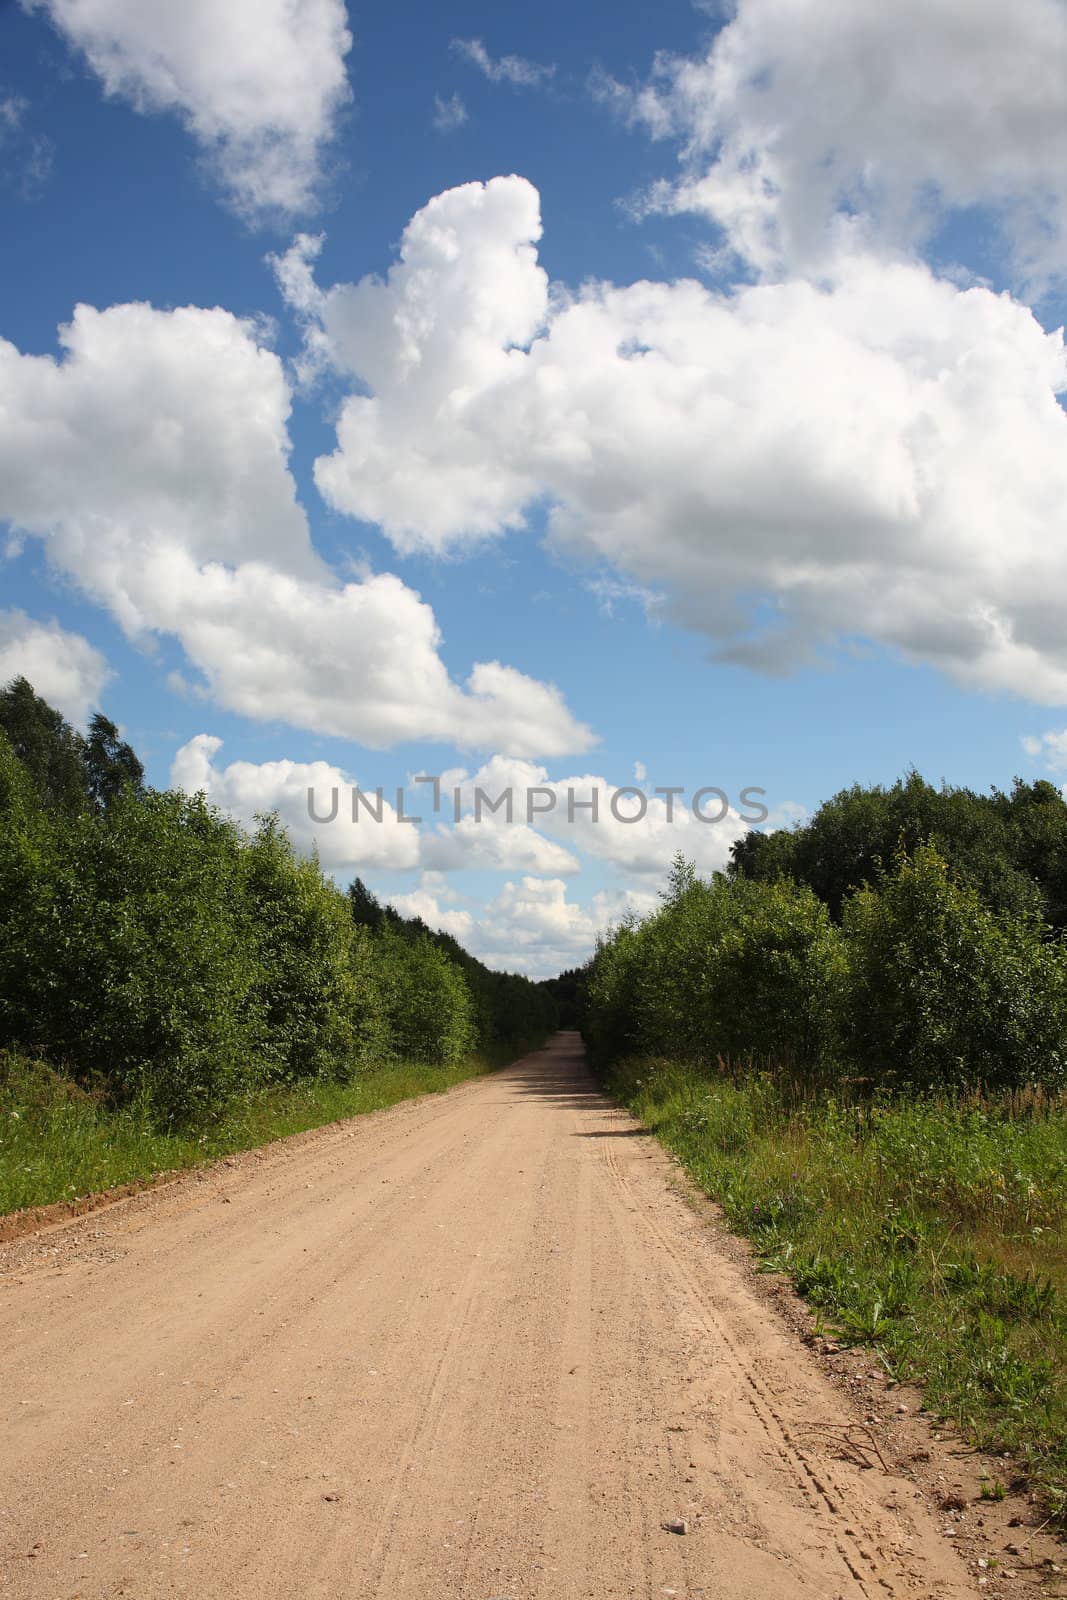 The country road leaving in forest. Landscape. Russia